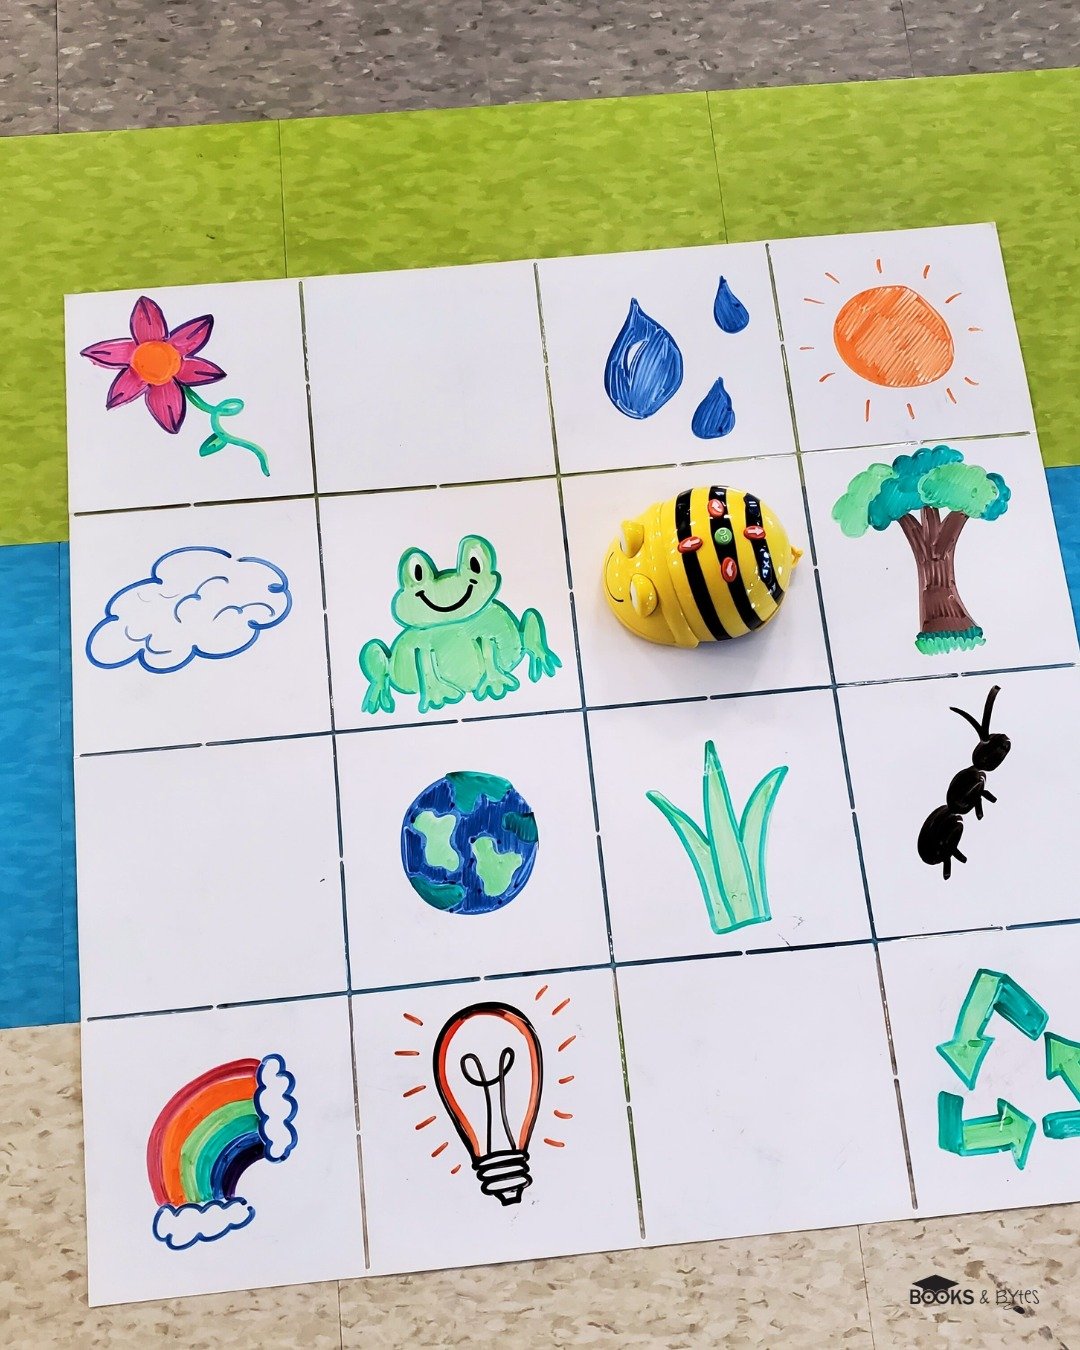 🌷 Simple SPRING coding idea right here! 🔽

If you have a Bee-Bot or Coding Mouse, this is a fun an easy coding activity for spring!

🌷 We used one of our dry-erase coding mats (which I LOVE! 😍) and our Bee-Bot robot. (You could also use paper or 